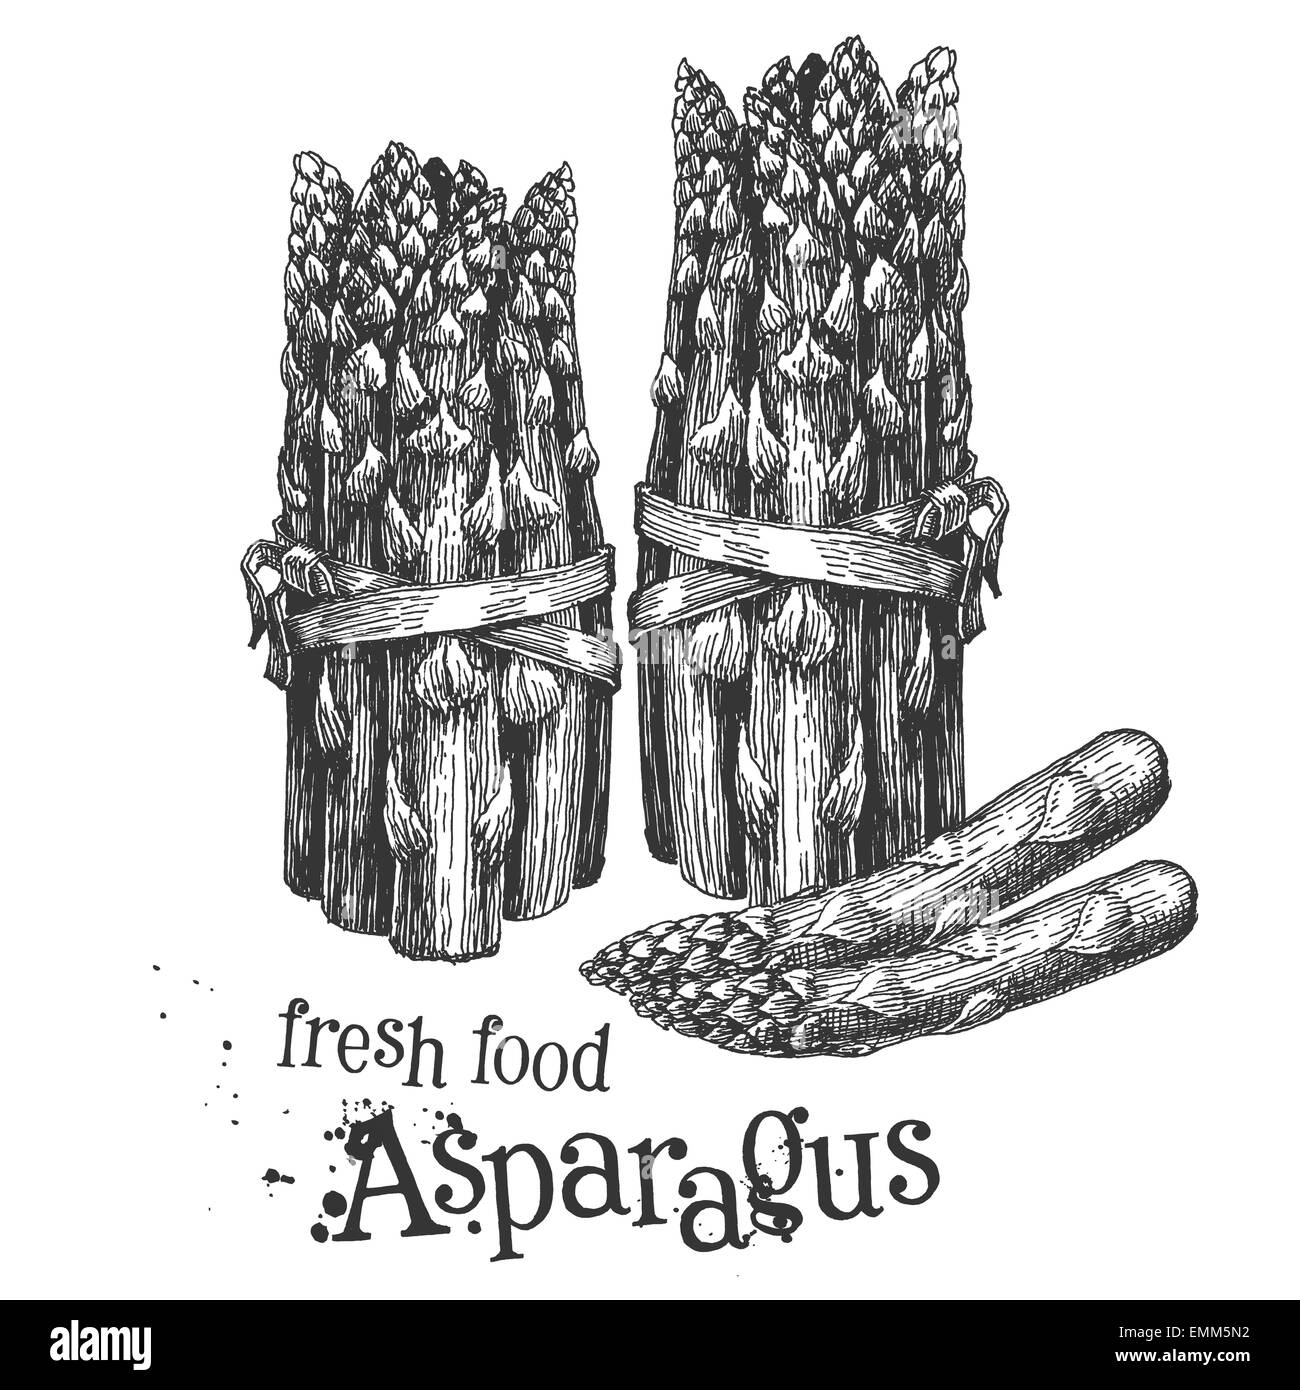 asparagus on a white background. sketch Stock Photo